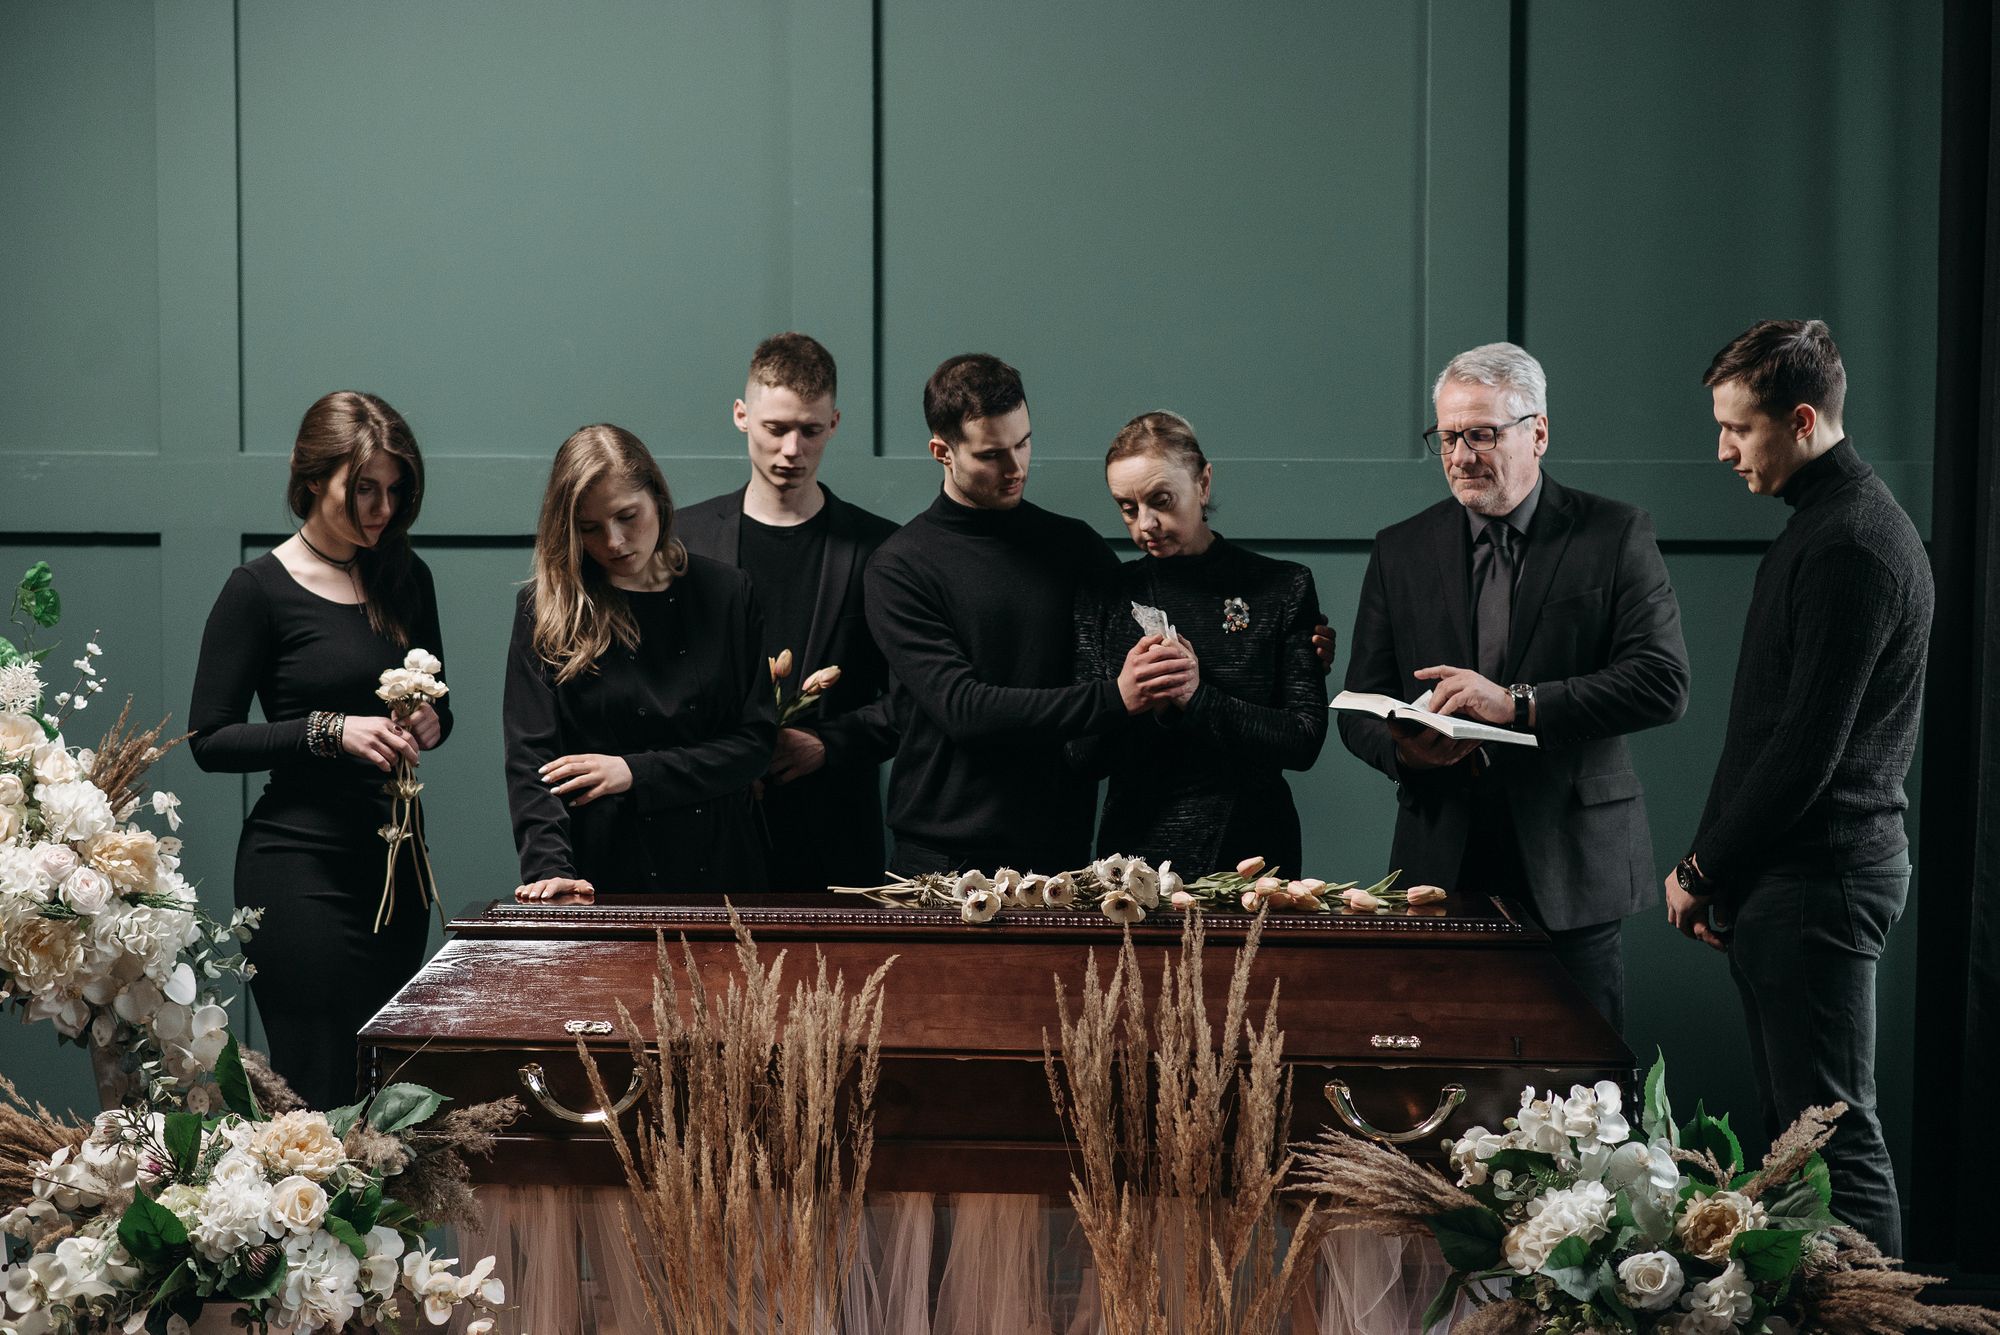 How long a funeral is held after death depends on what services are selected before burial or cremation. Learn more in this guide.